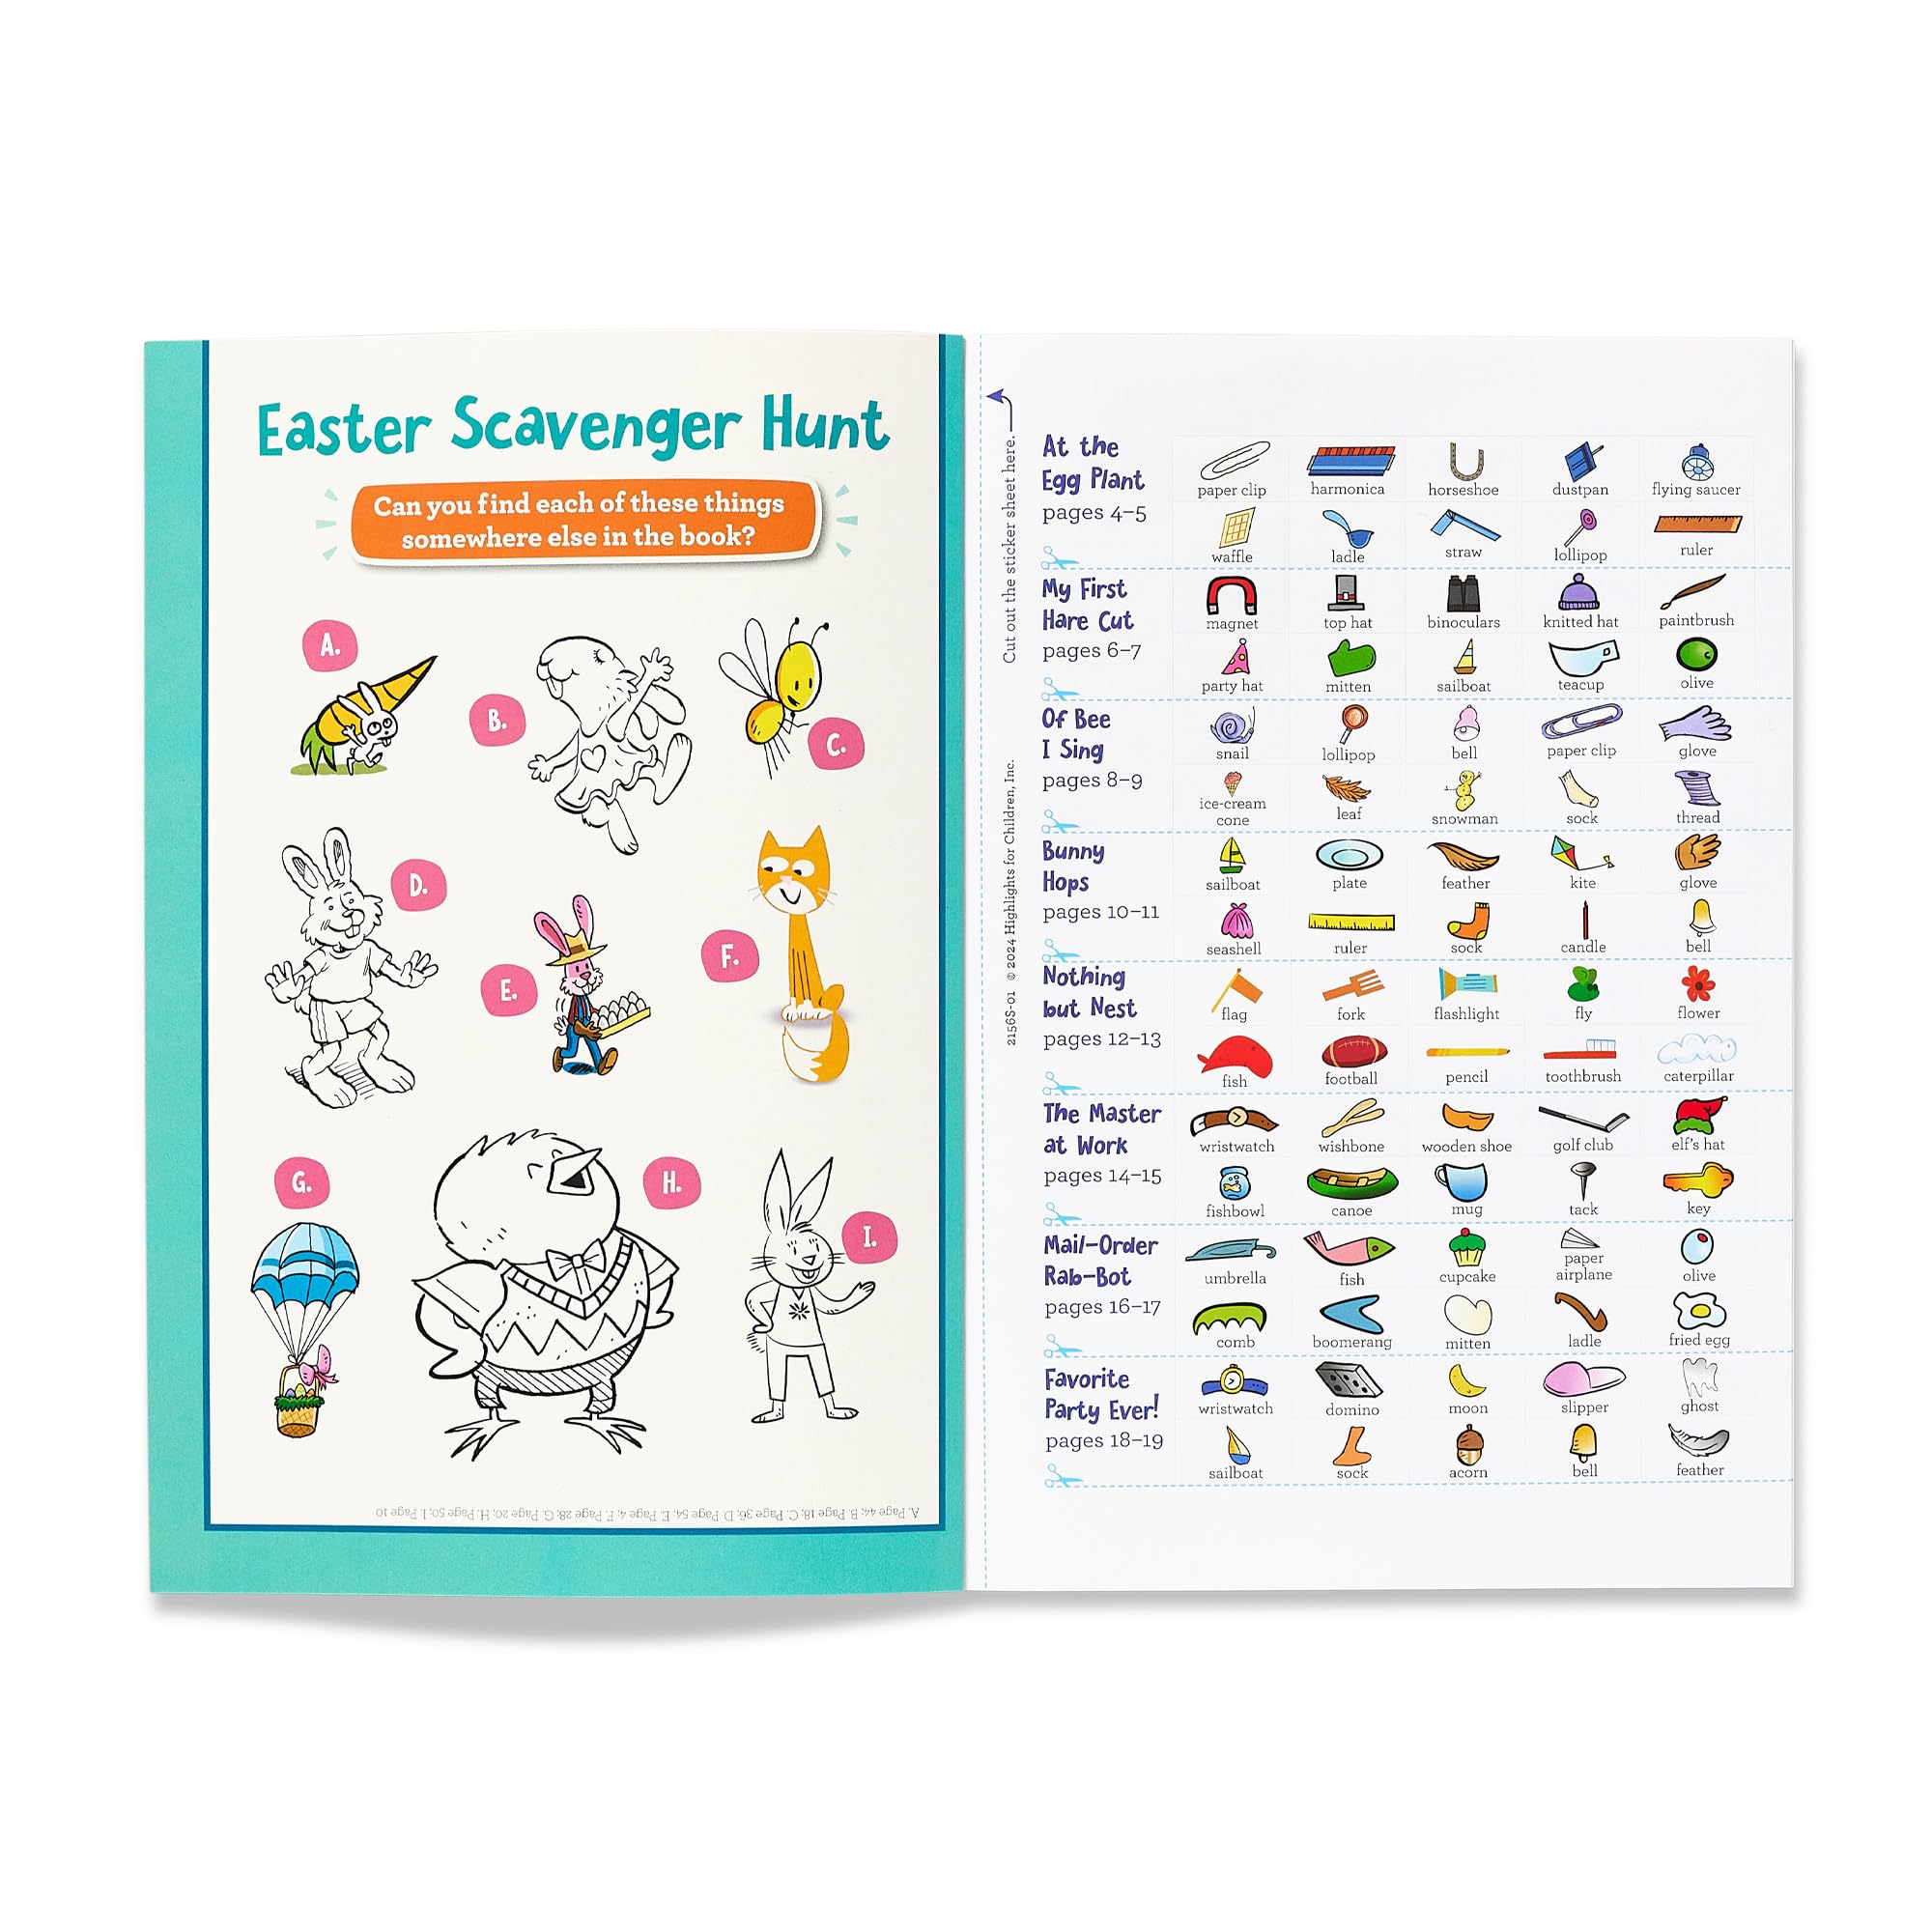 Silly Sticker Stories: Easter (Highlights Hidden Pictures Silly Sticker Stories)